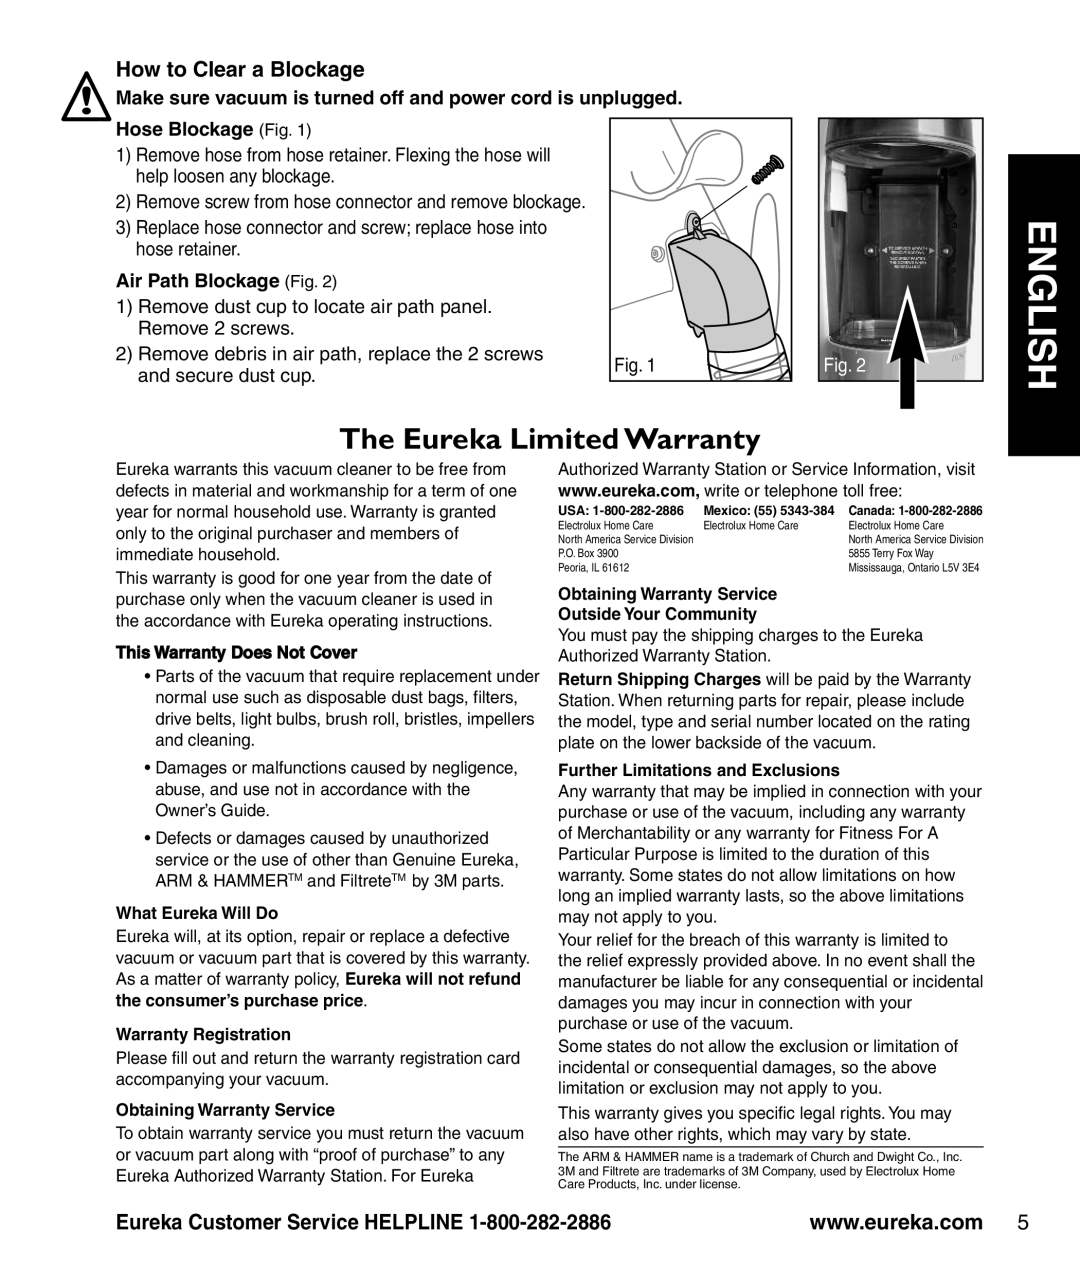 Eureka 8800-8849 Series How to Clear a Blockage, Hose Blockage Fig, Air Path Blockage Fig, This Warranty Does Not Cover 